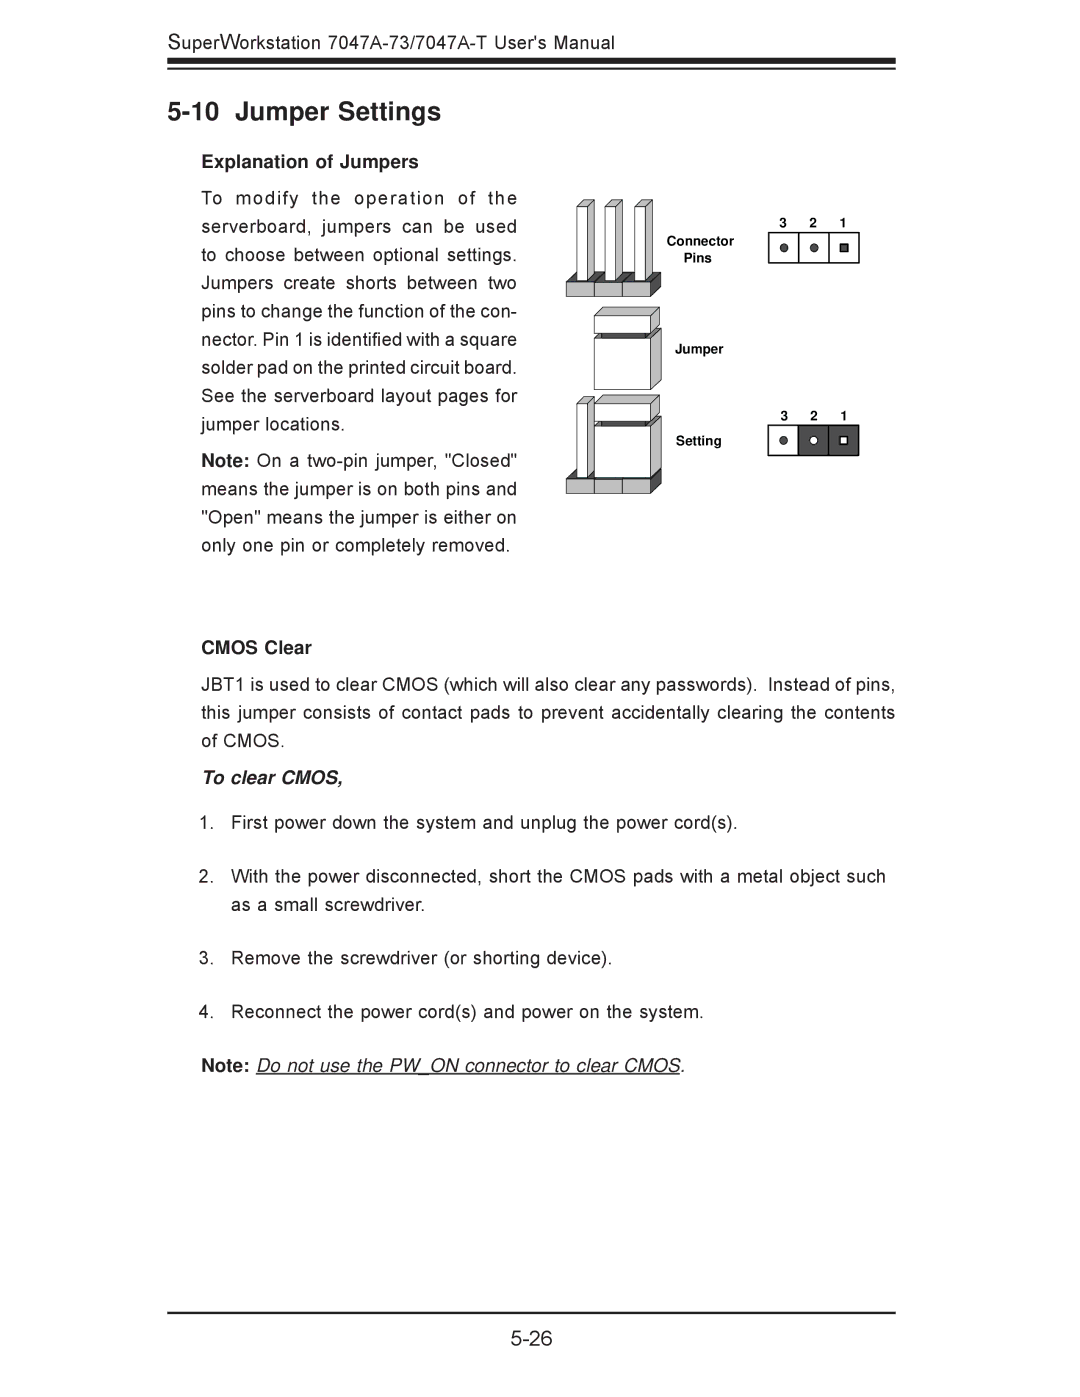 SUPER MICRO Computer 7047A-T, 7047A-73 user manual Jumper Settings, Explanation of Jumpers, Cmos Clear 